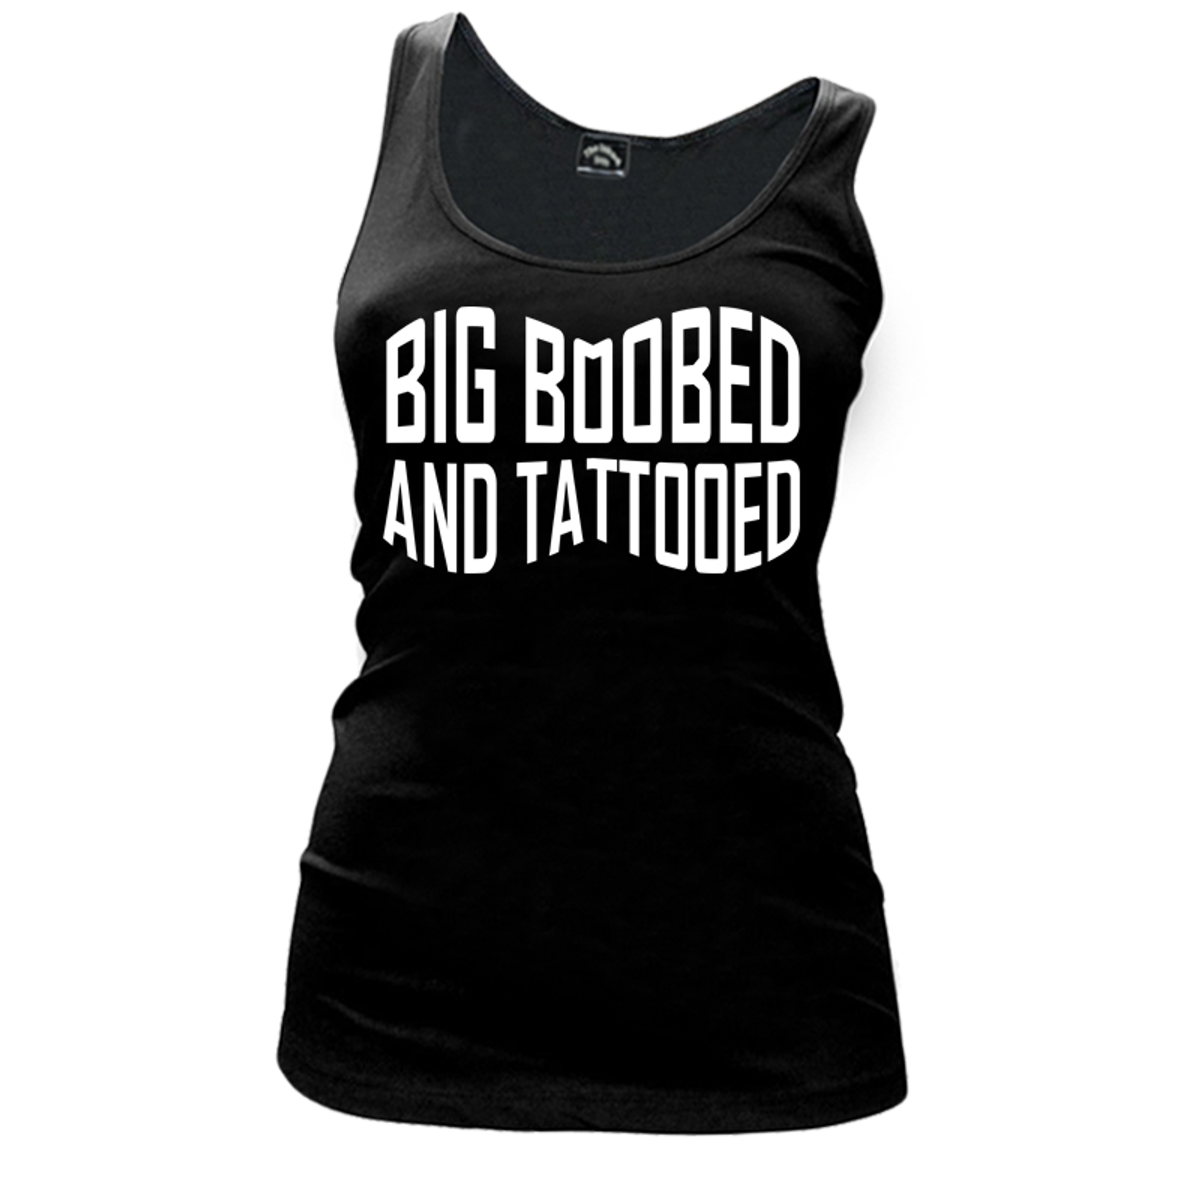 Womens Big Boobed And Tattooed New Tank Top The Inked Boys Shop 9484